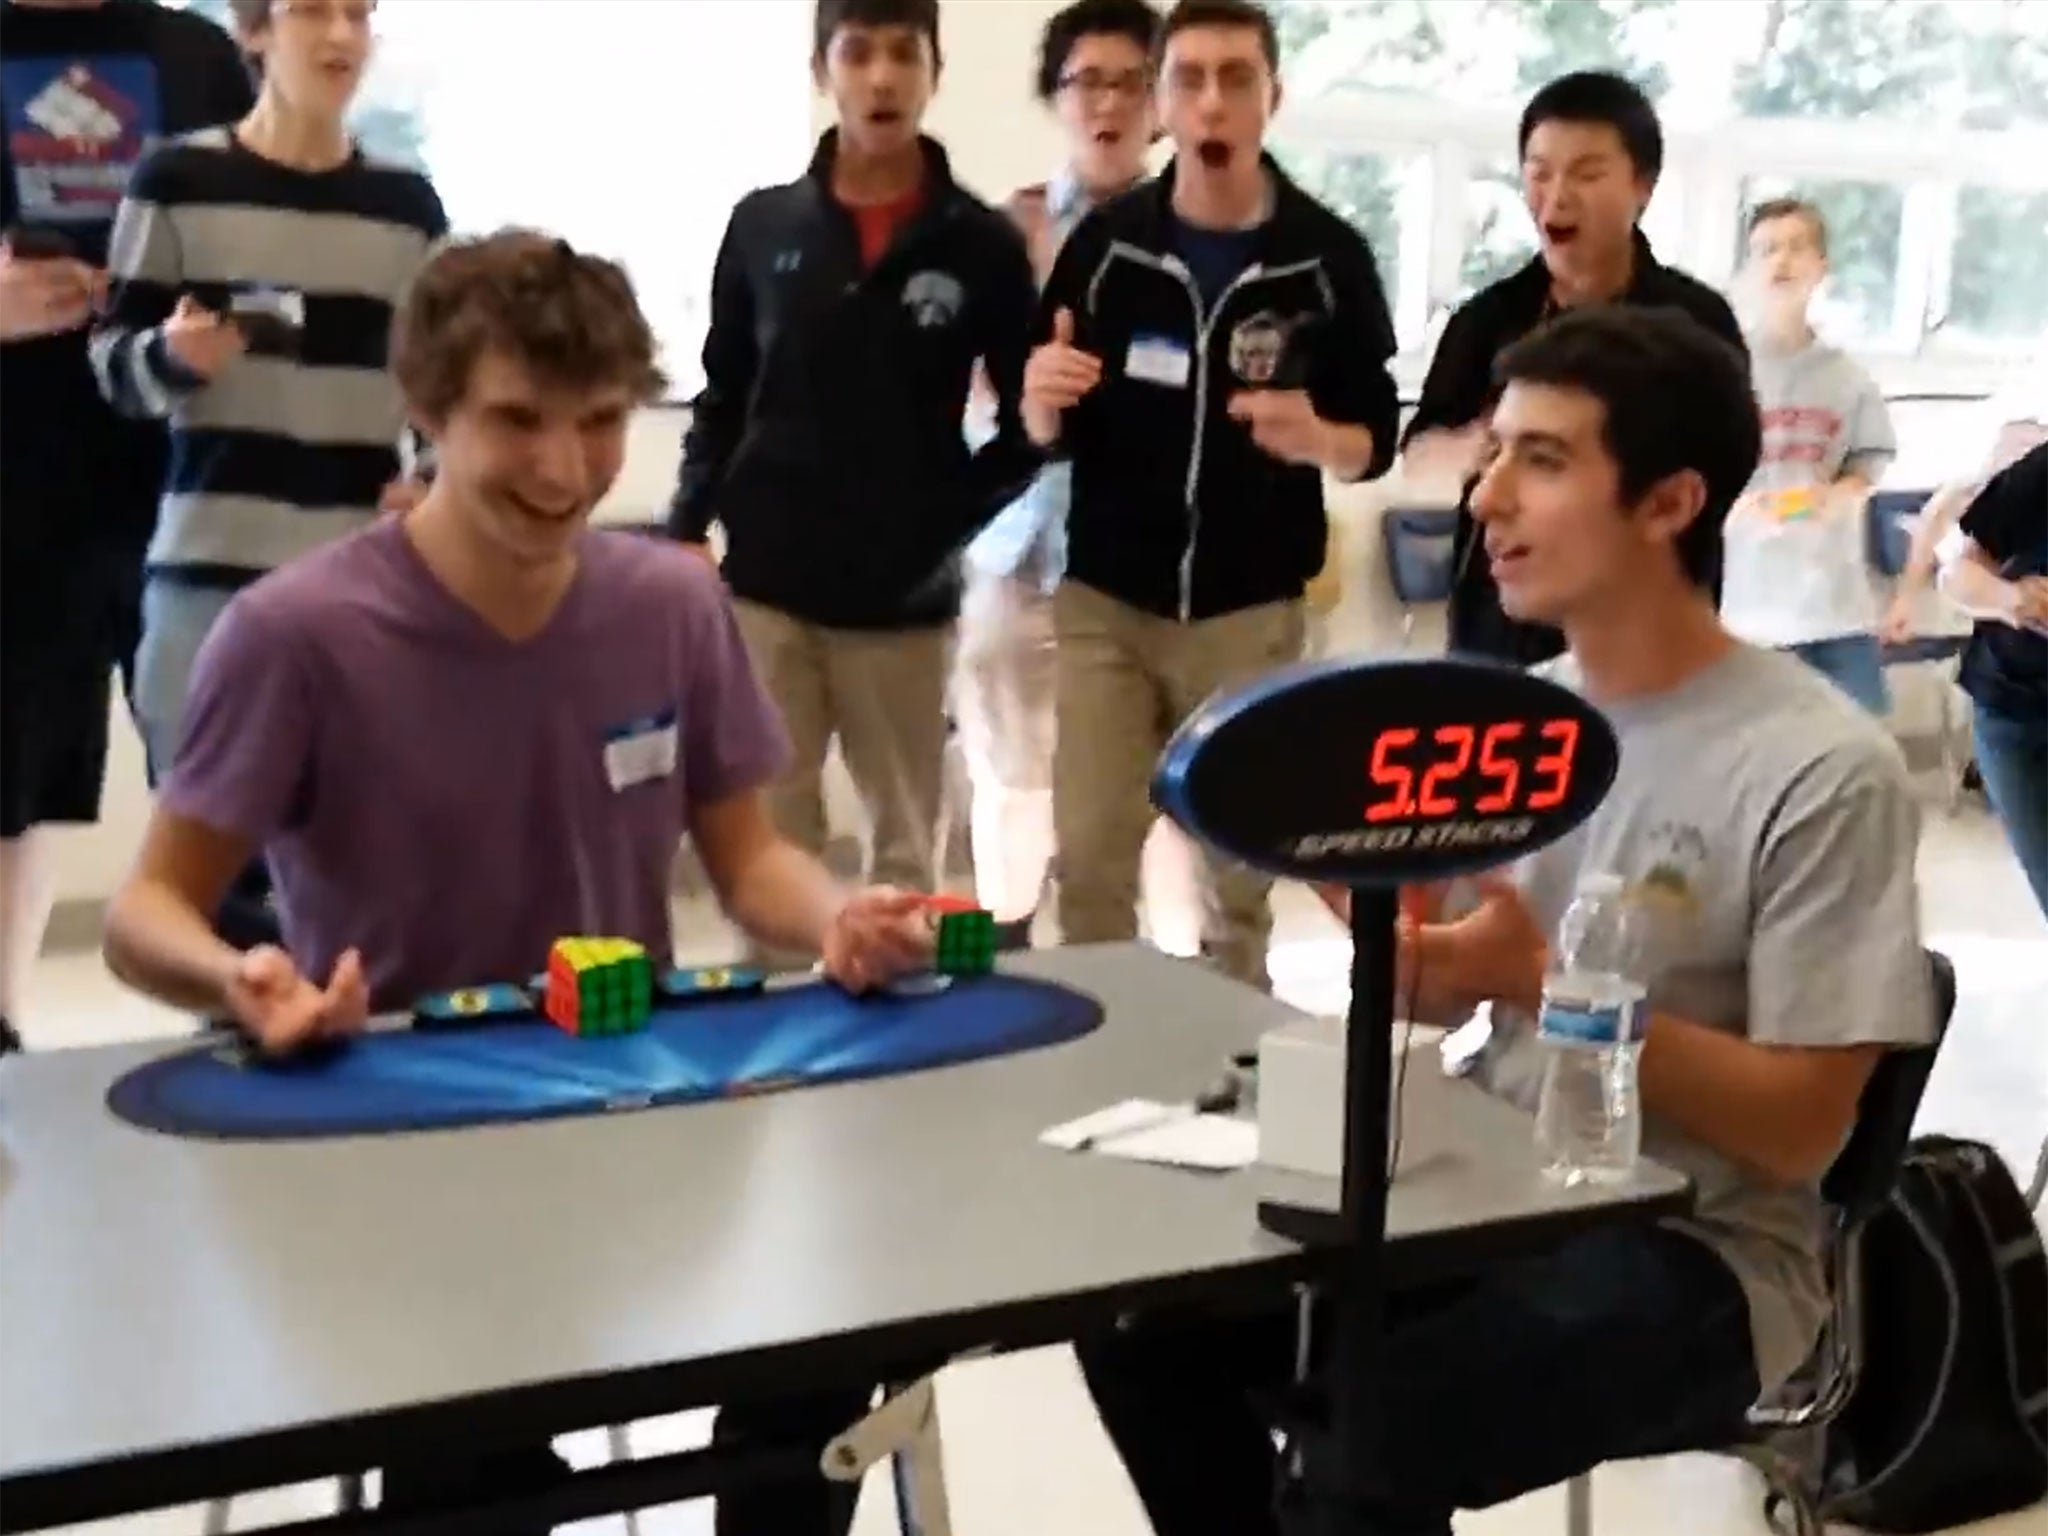 Collin Burns as he breaks the single solve world record for a 3x3x3 Rubik's Cube